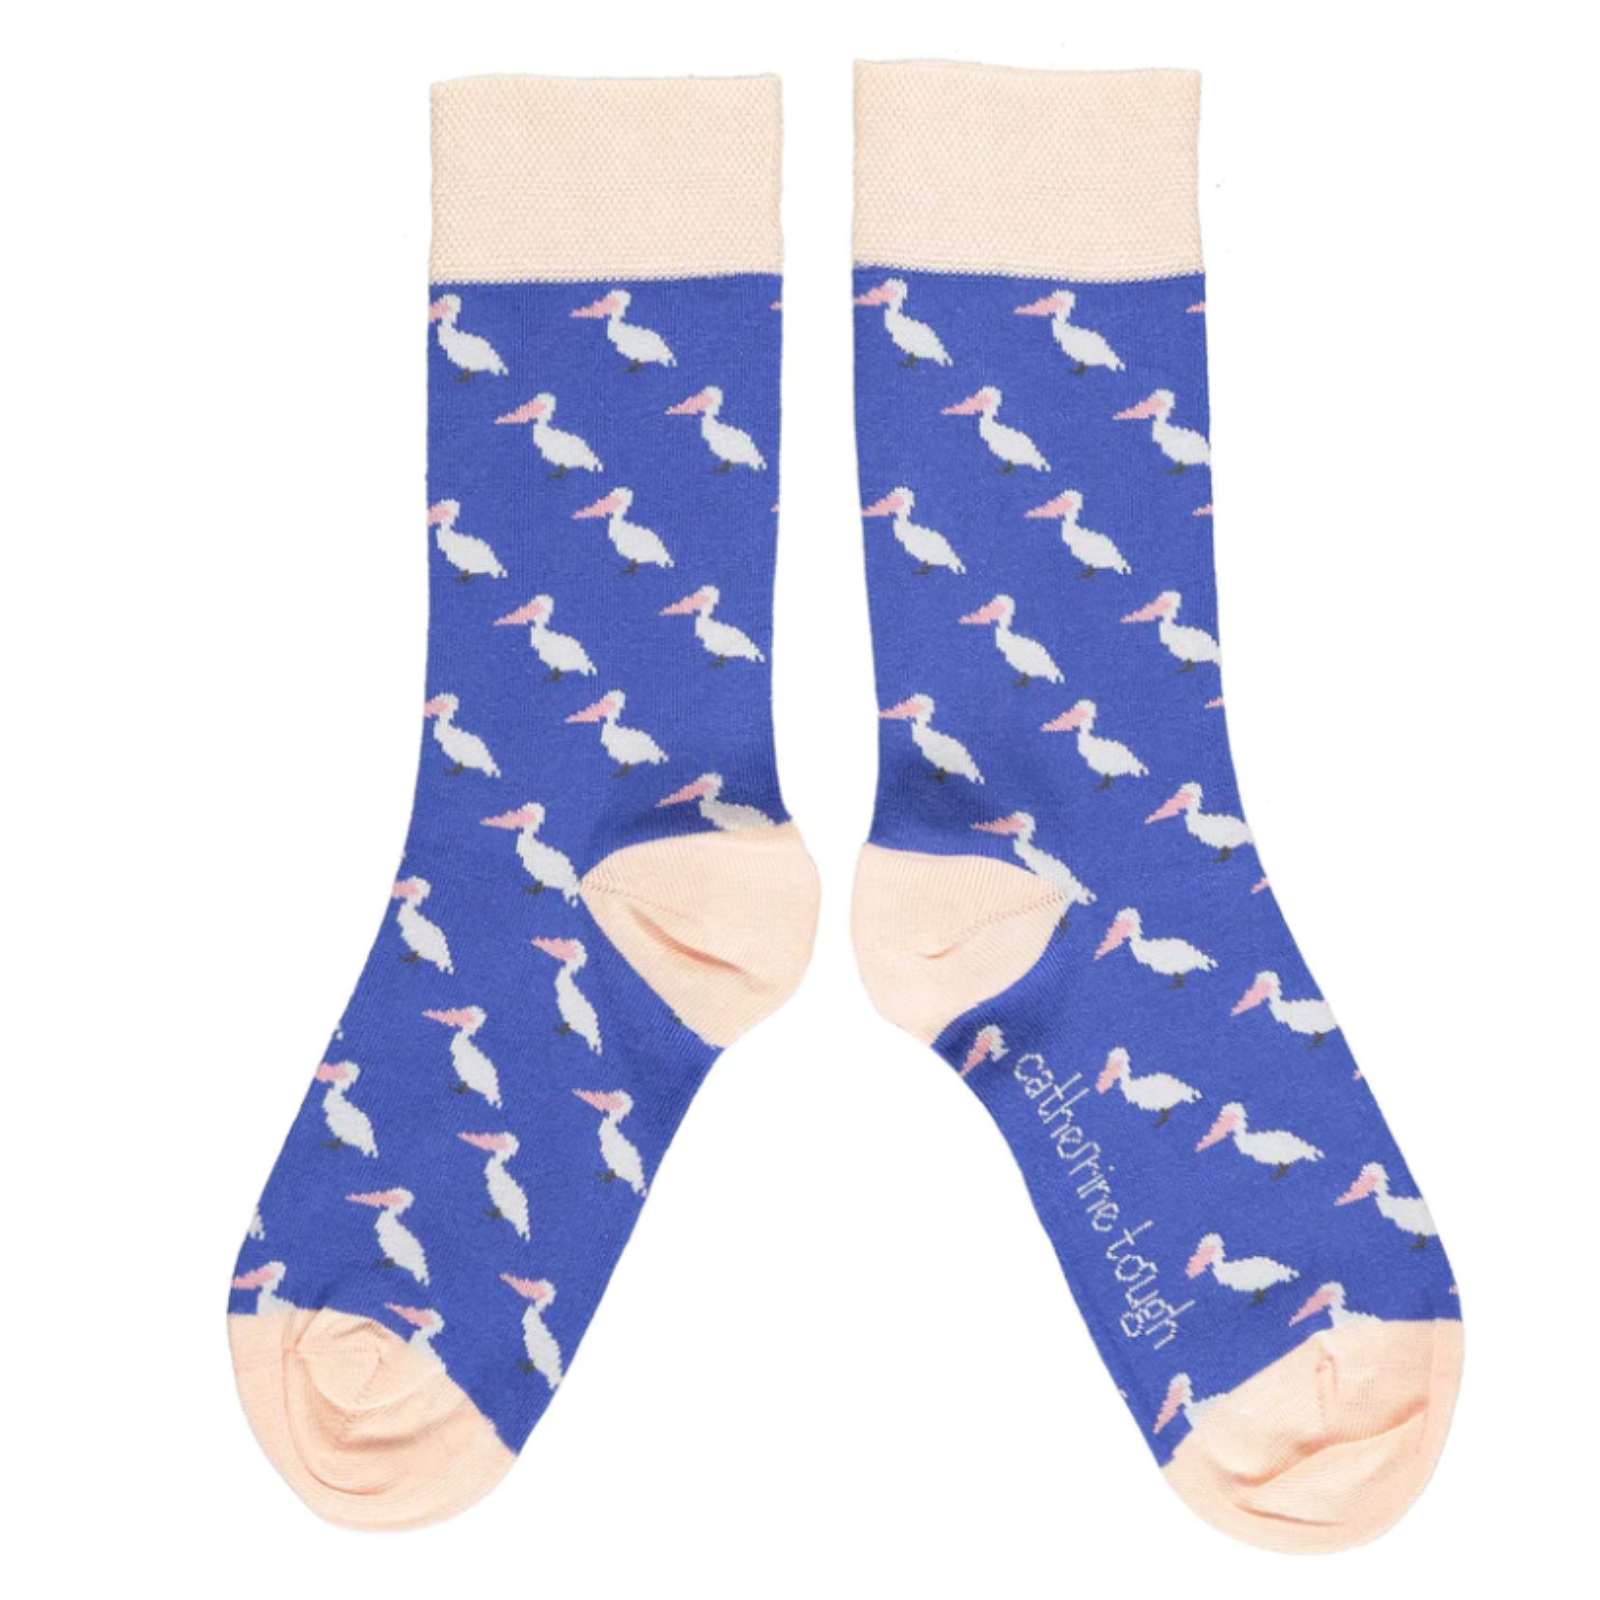 Catherine Tough Pelican blue women's crew sock featuring white pelicans with pink bills on green background with peach cuff, heel, and toe